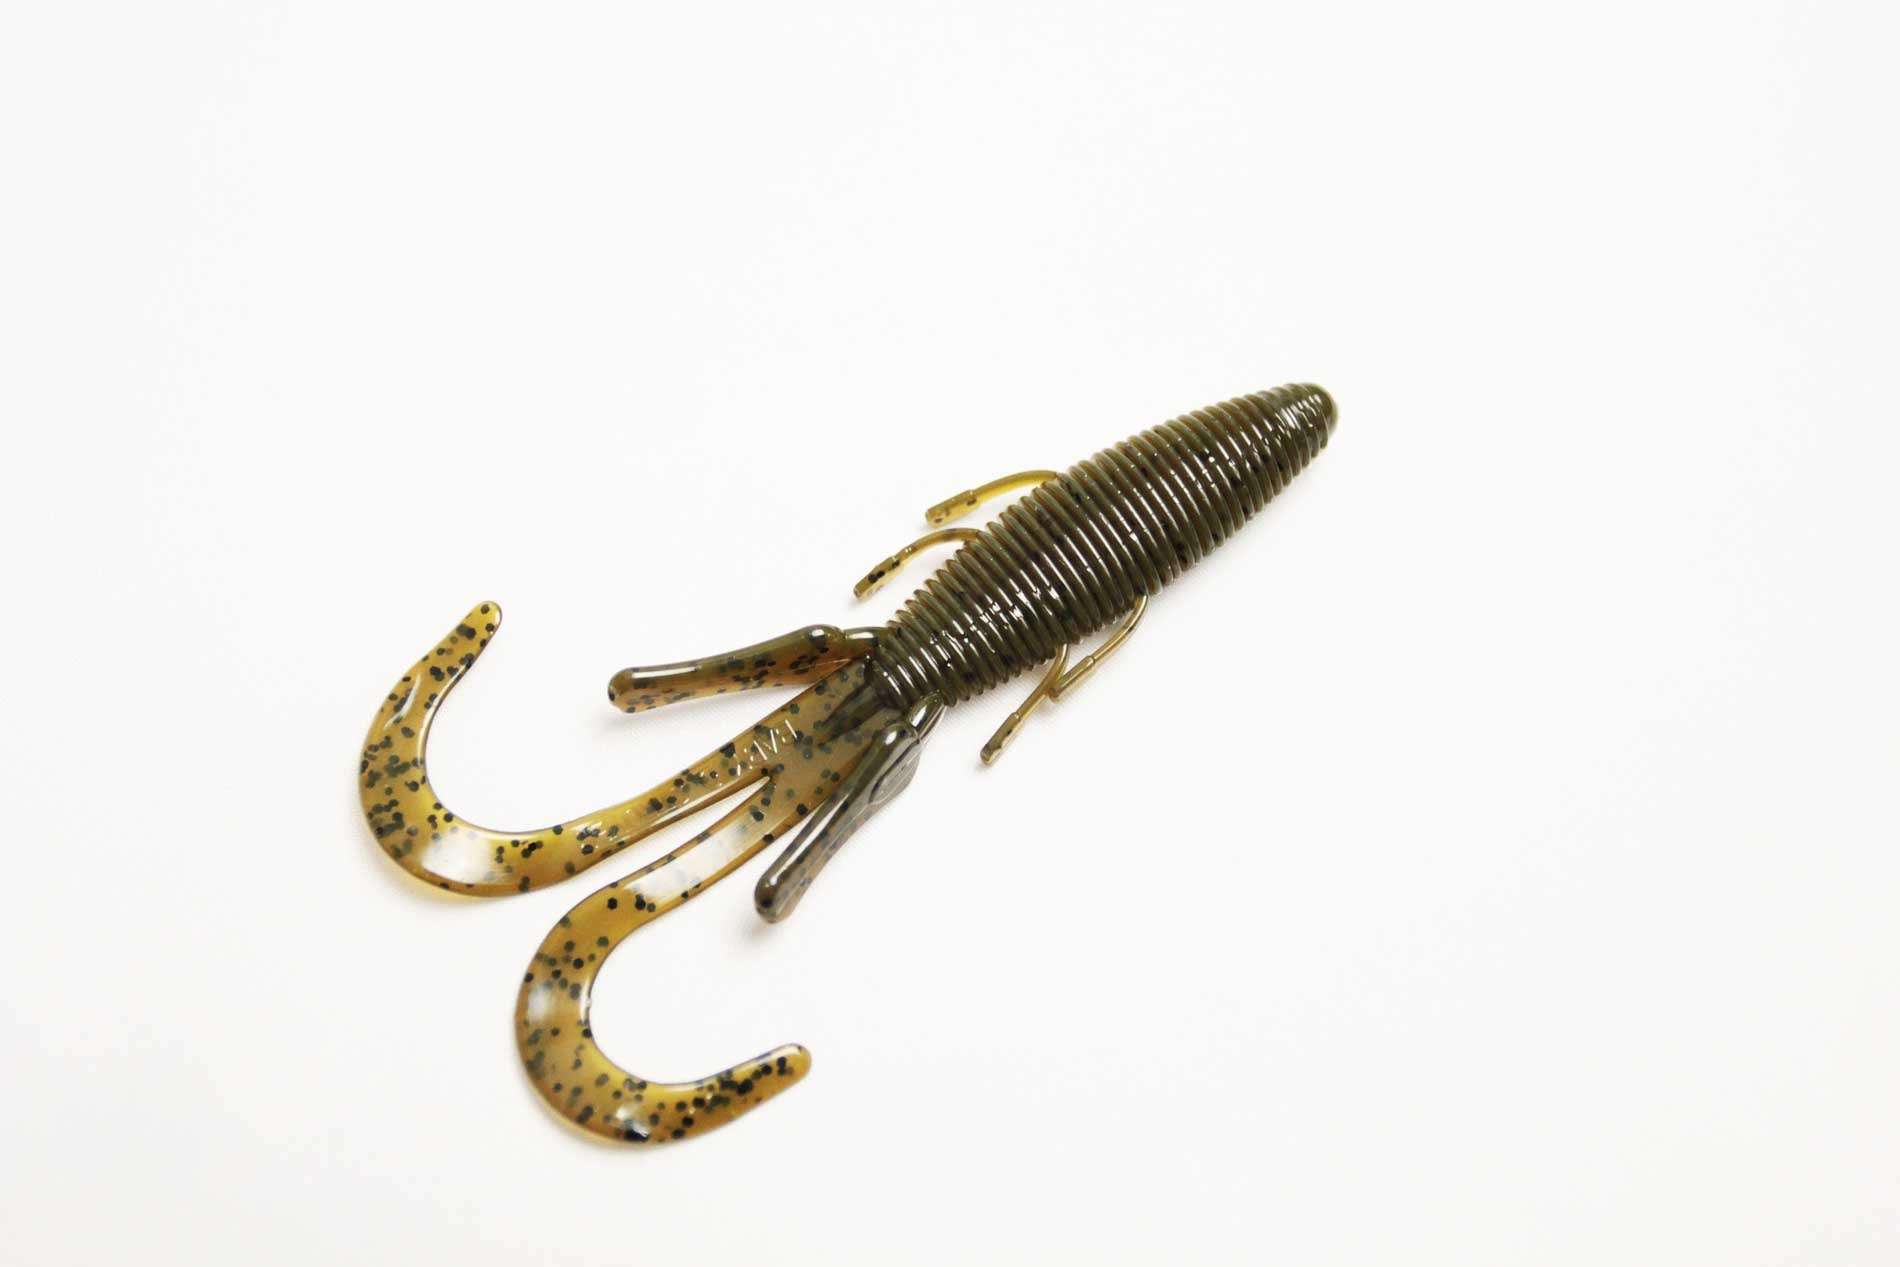 <b>Missile Baits</b><br>	Baby D Stroyer<br>	The Baby D Stroyer is the bite-sized version of the monster creature bait, the D Stroyer. The Baby measures just under 5 inches long with extended tails, which undulate with the slightest twitch. The Baby D Stroyer has some mass to its body, but still in a smaller profile. It can be rigged a ton of different ways, including Texas rig, Carolina rig, wobble-head jig, shaky head, as a jig trailer, or for punching. It has a versatile, fish-catching shape with a natural action bass canât resist. They will be available in eight colors, including the popular Green Pumpkin Flash and the all new GP3. Green Pumpkin is the color shown above.